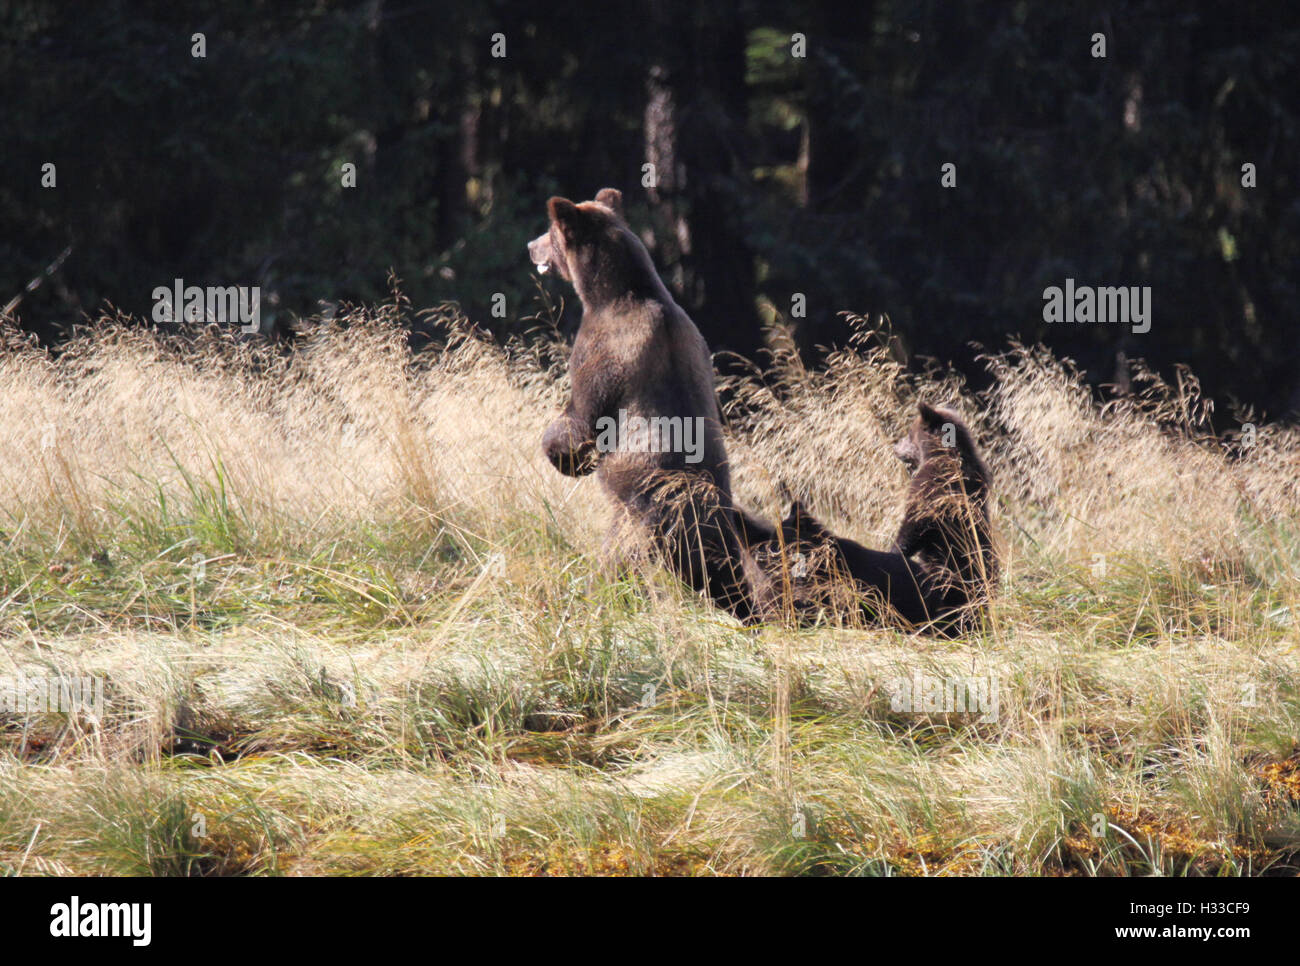 Grizzly sow checking out the competition Stock Photo